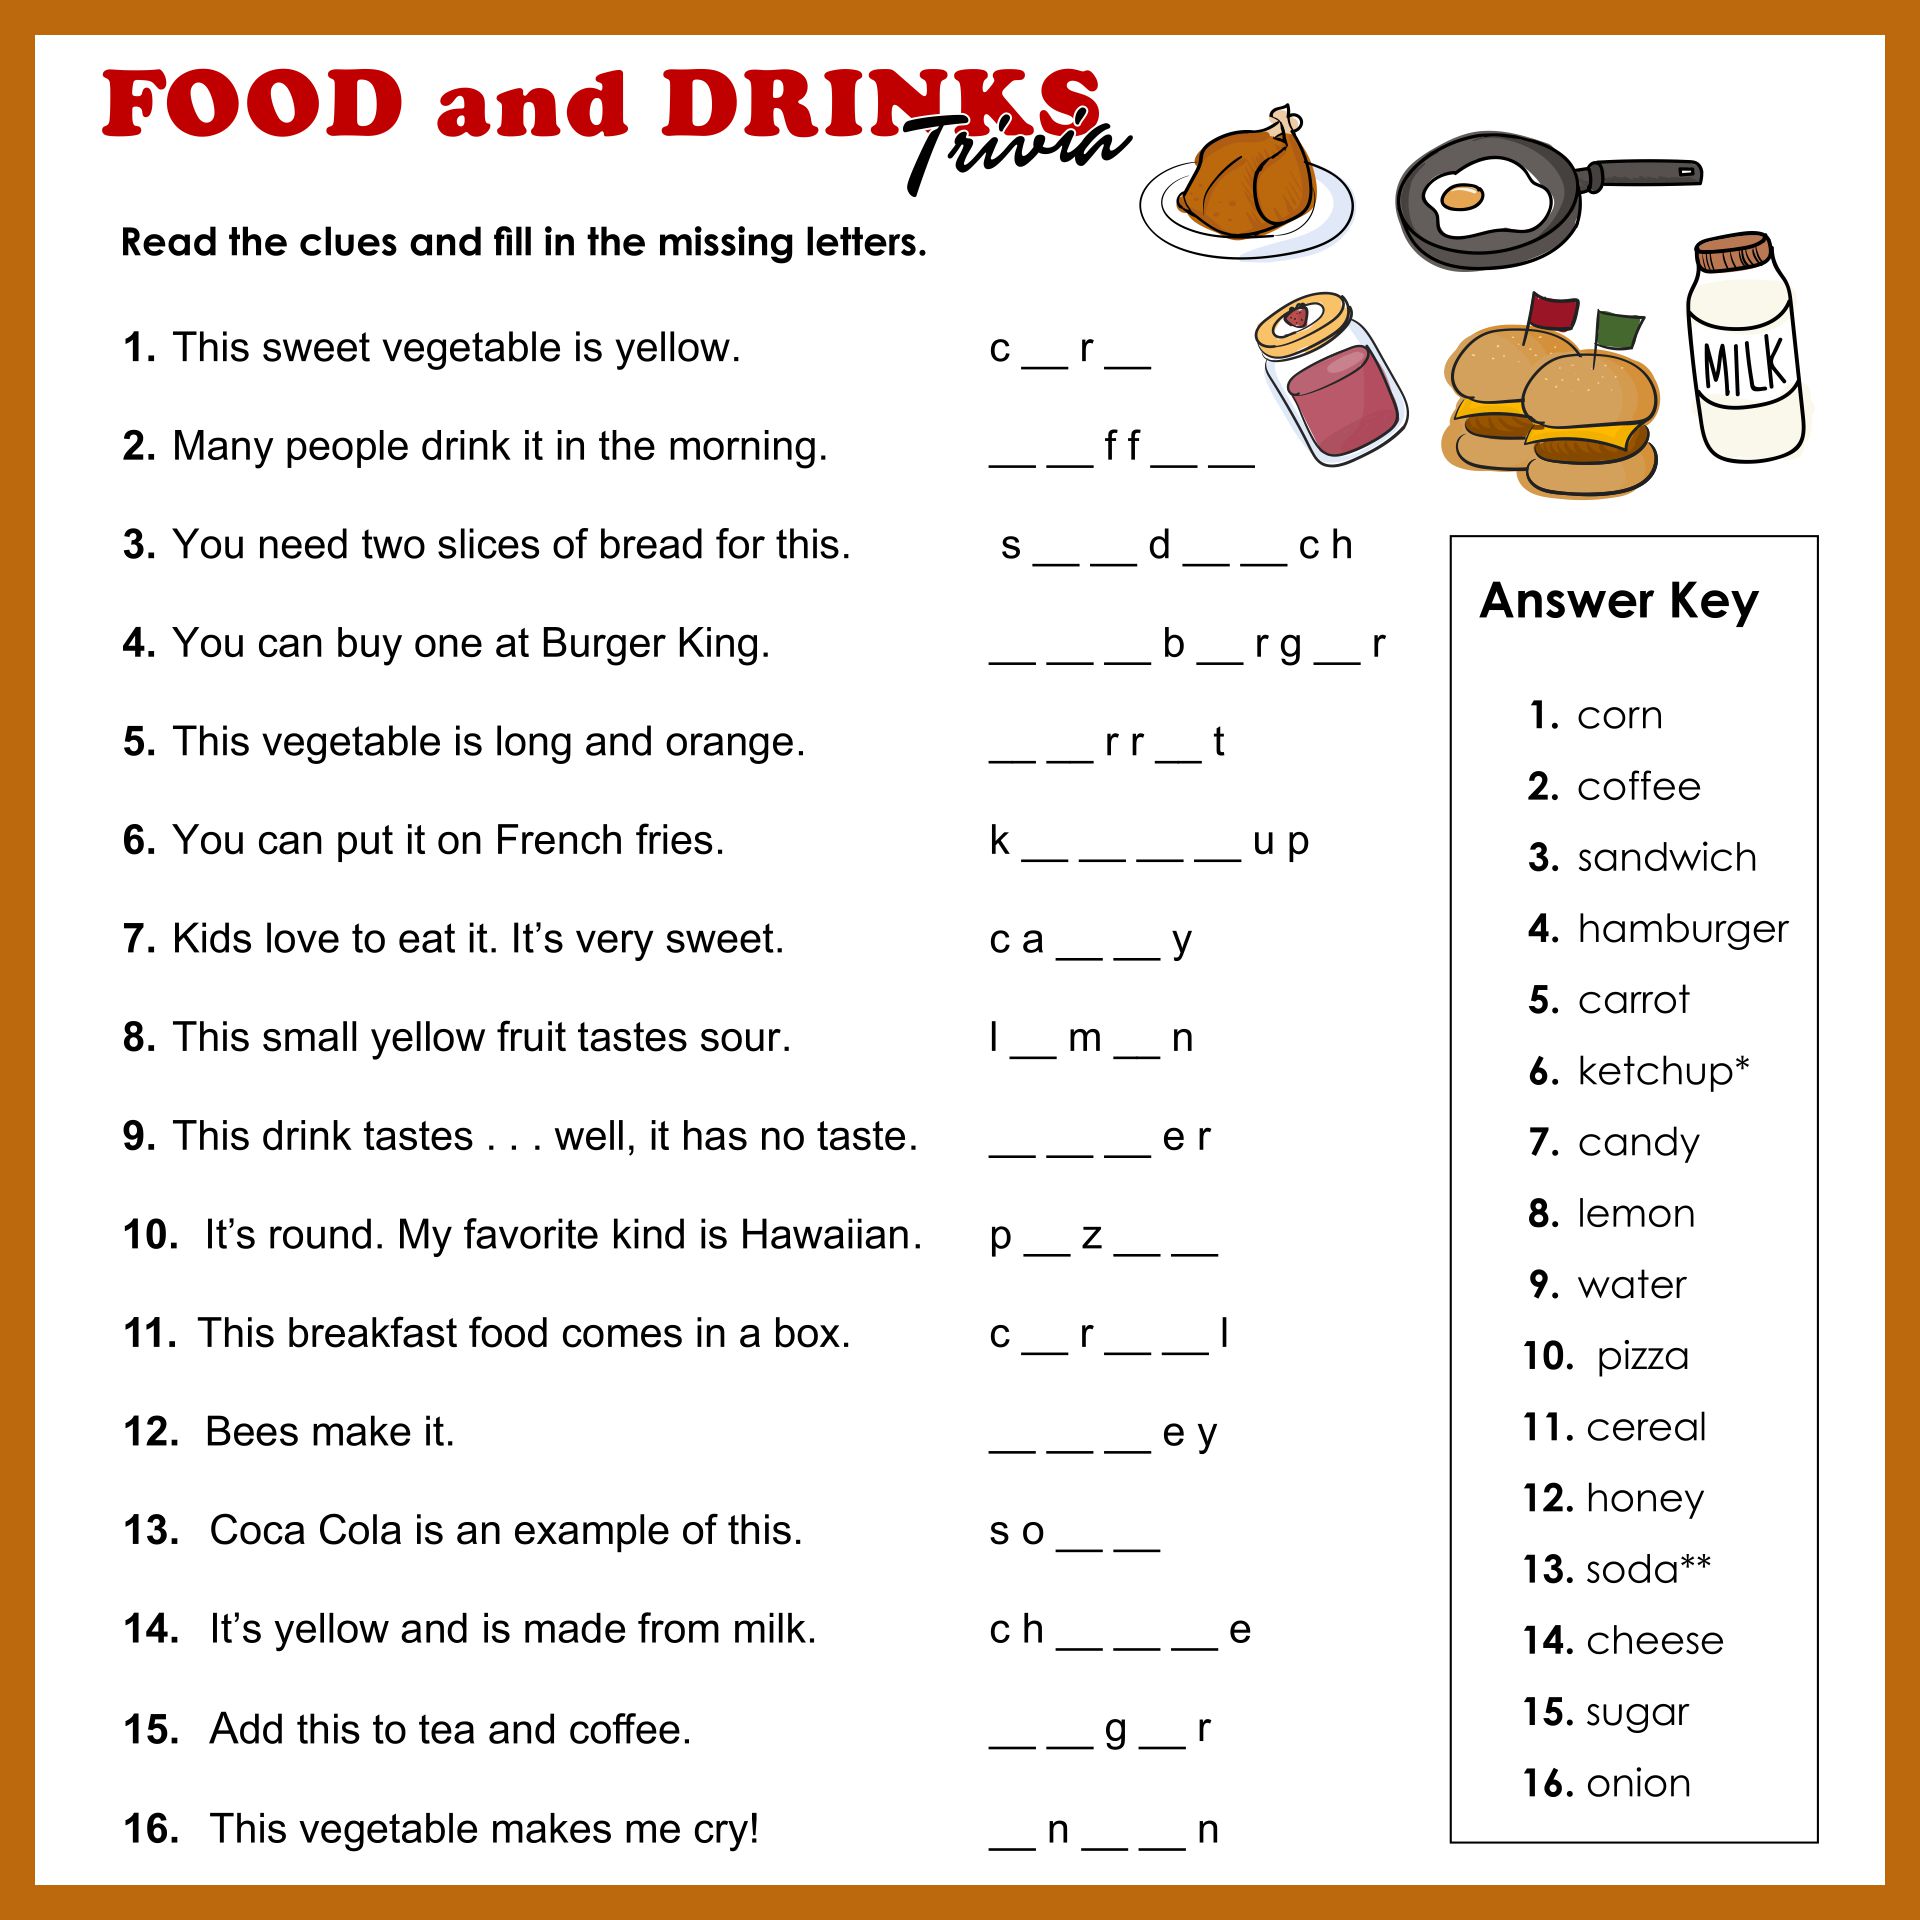 Food And Drink Trivia Questions And Answers Printable